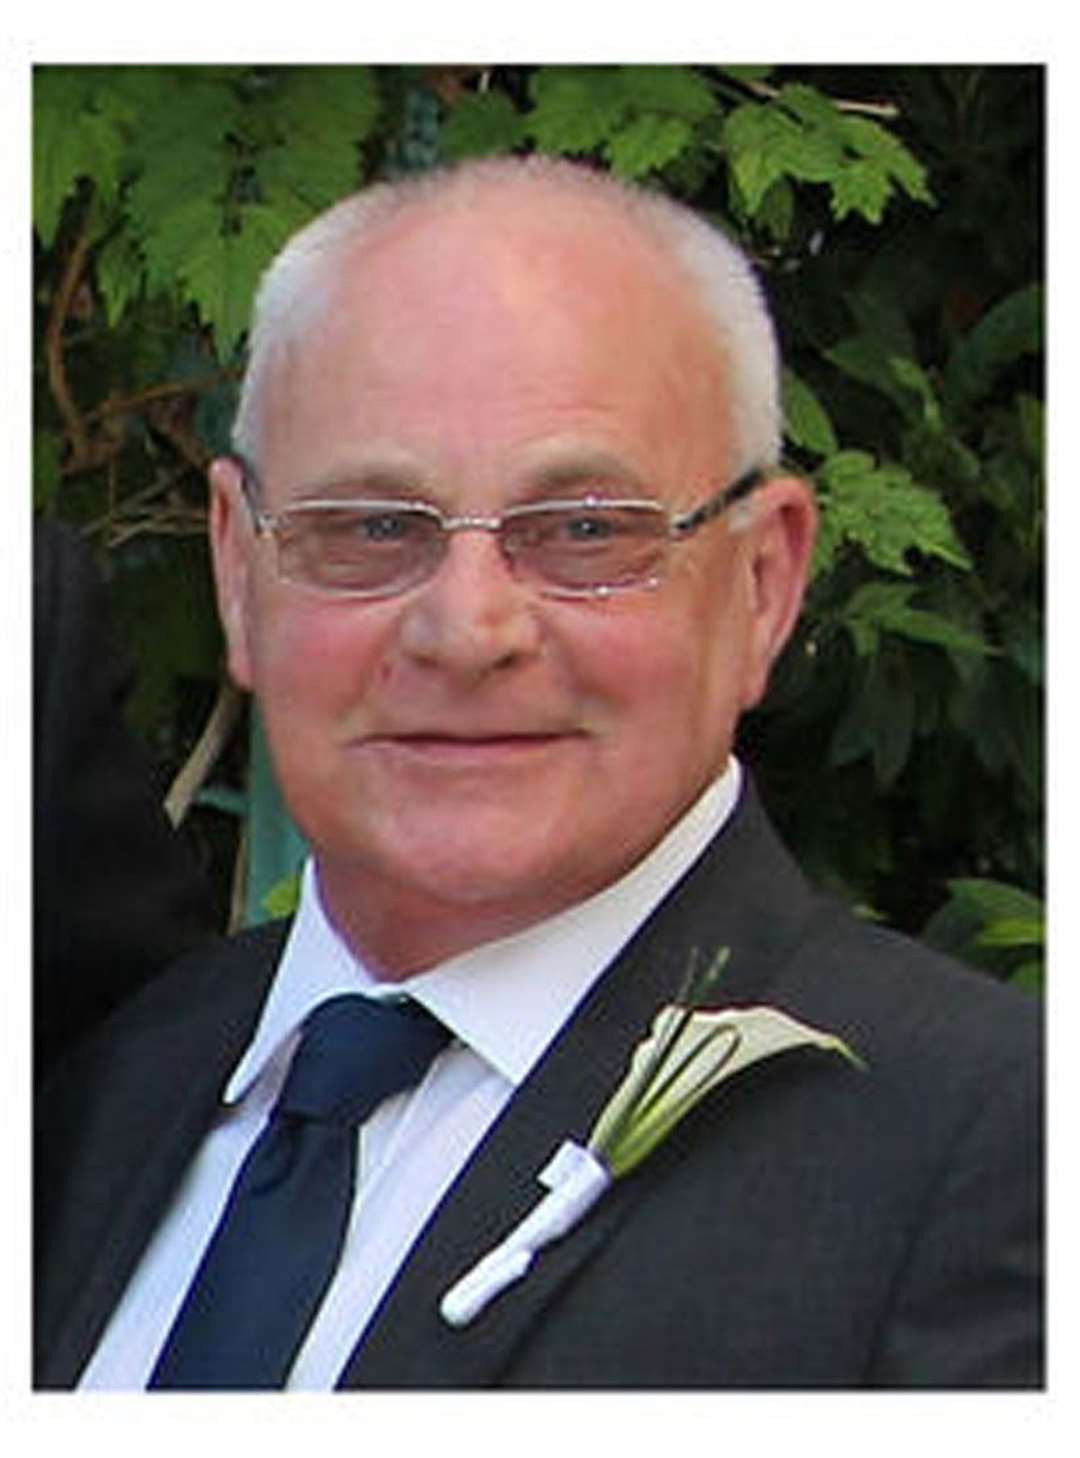 Lorry driver Donald Collett, 62, from Croydon, was described as a loving father and grandfather (BTP/PA)